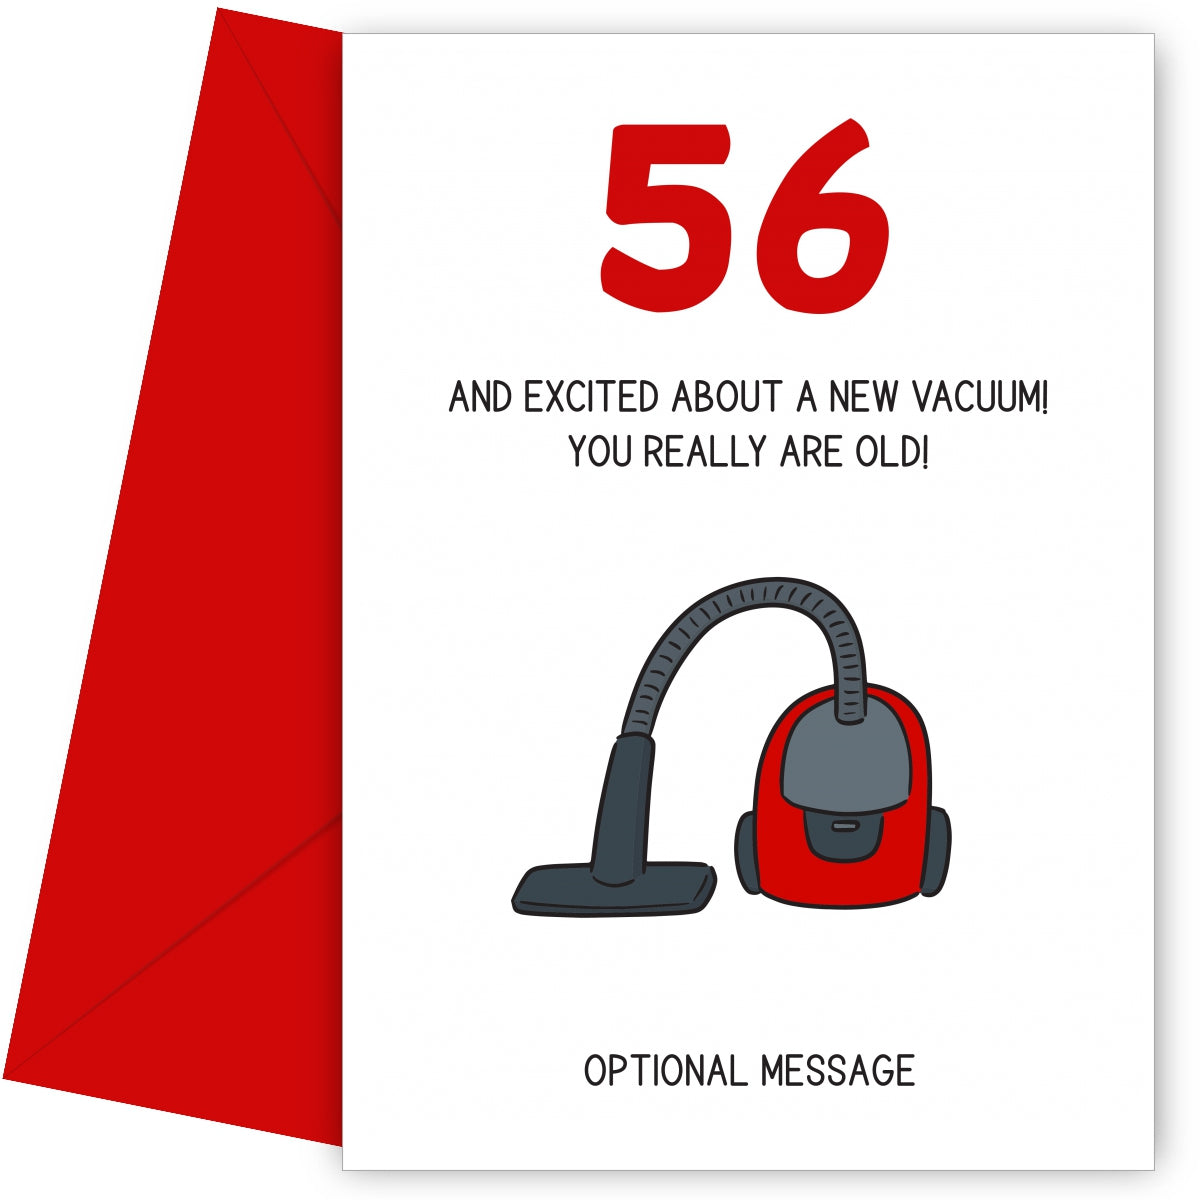 Happy 56th Birthday Card - Excited About a New Vacuum!